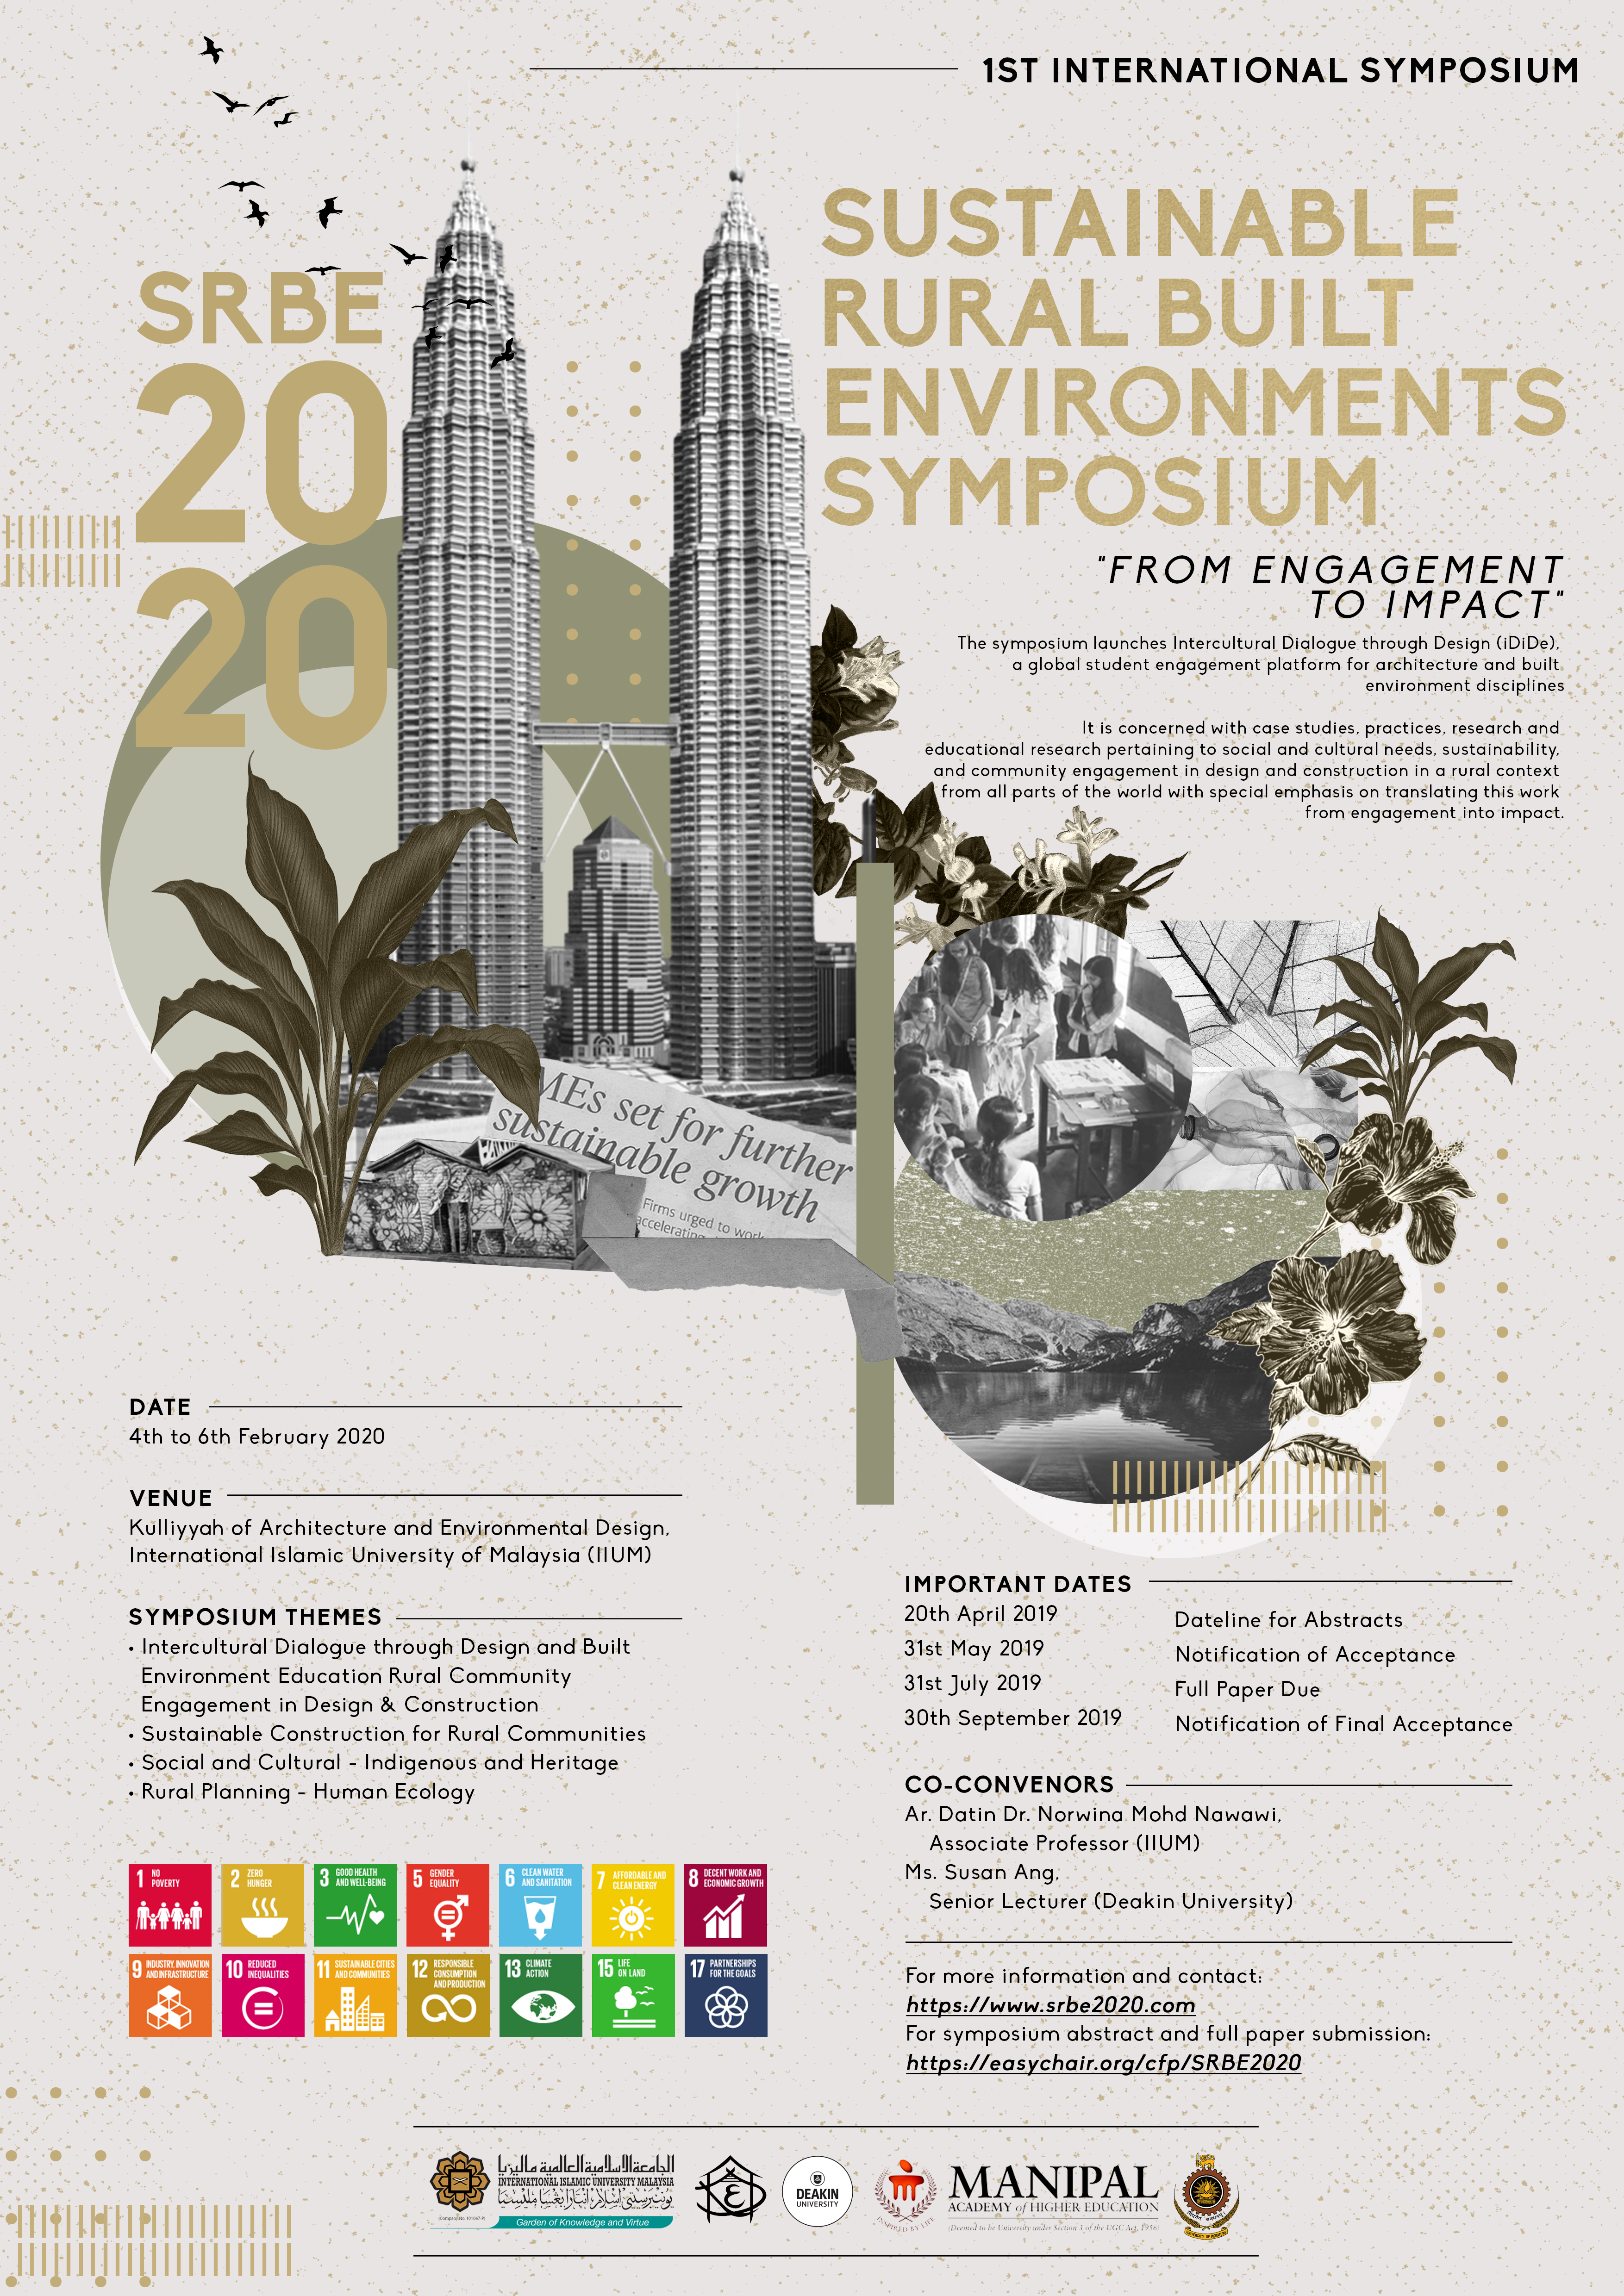 Sustainable Rural Built Environments Symposium (SRBE) 2020